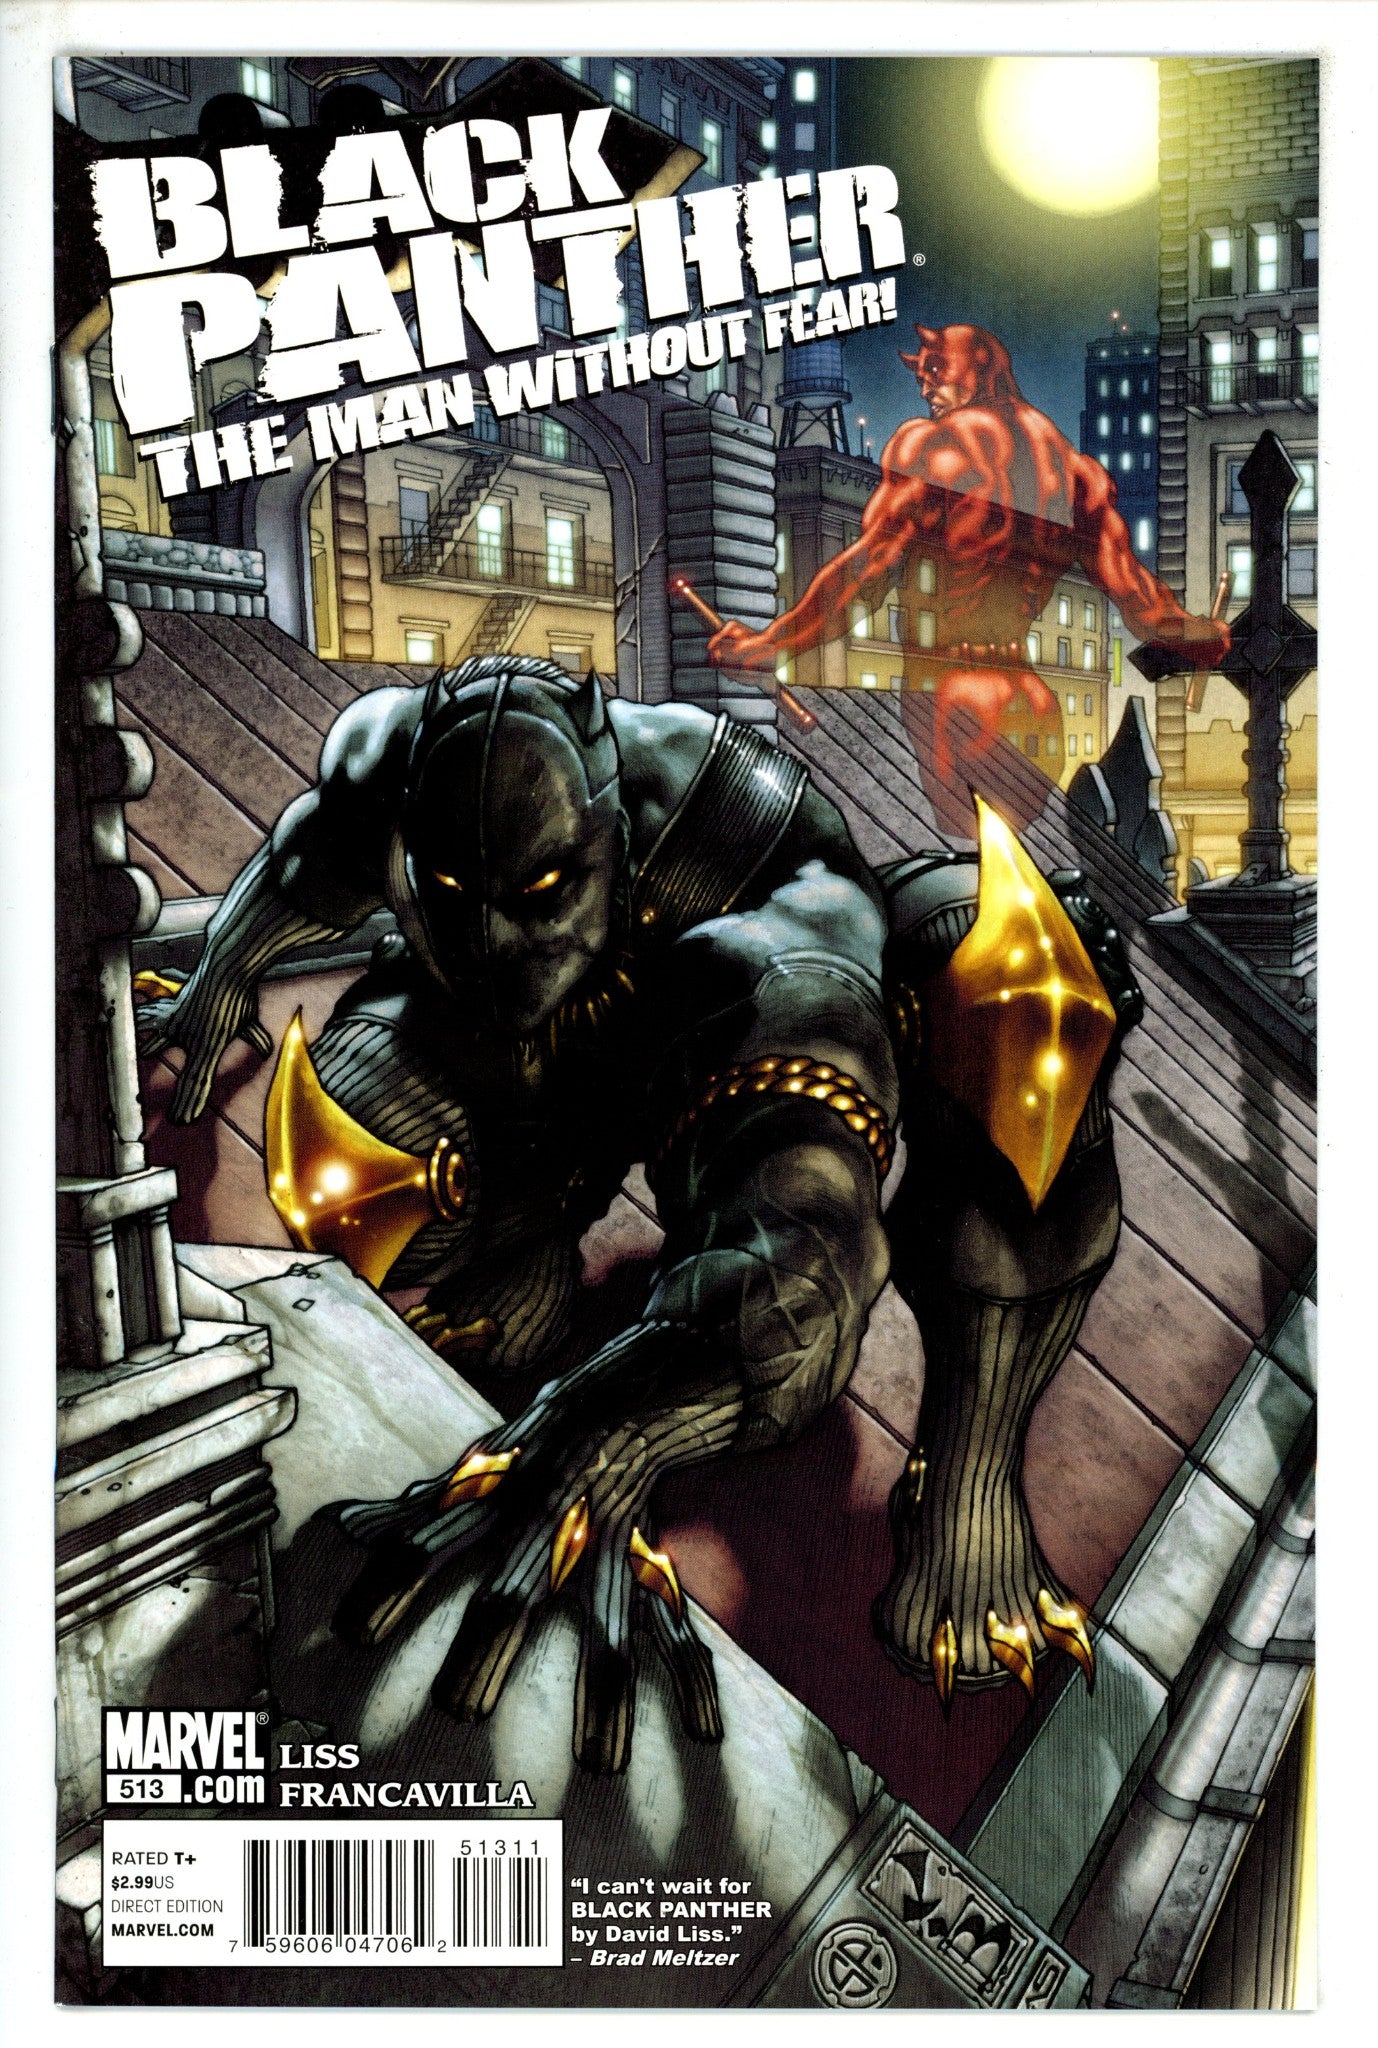 Black Panther: The Man without Fear 513 (2011)